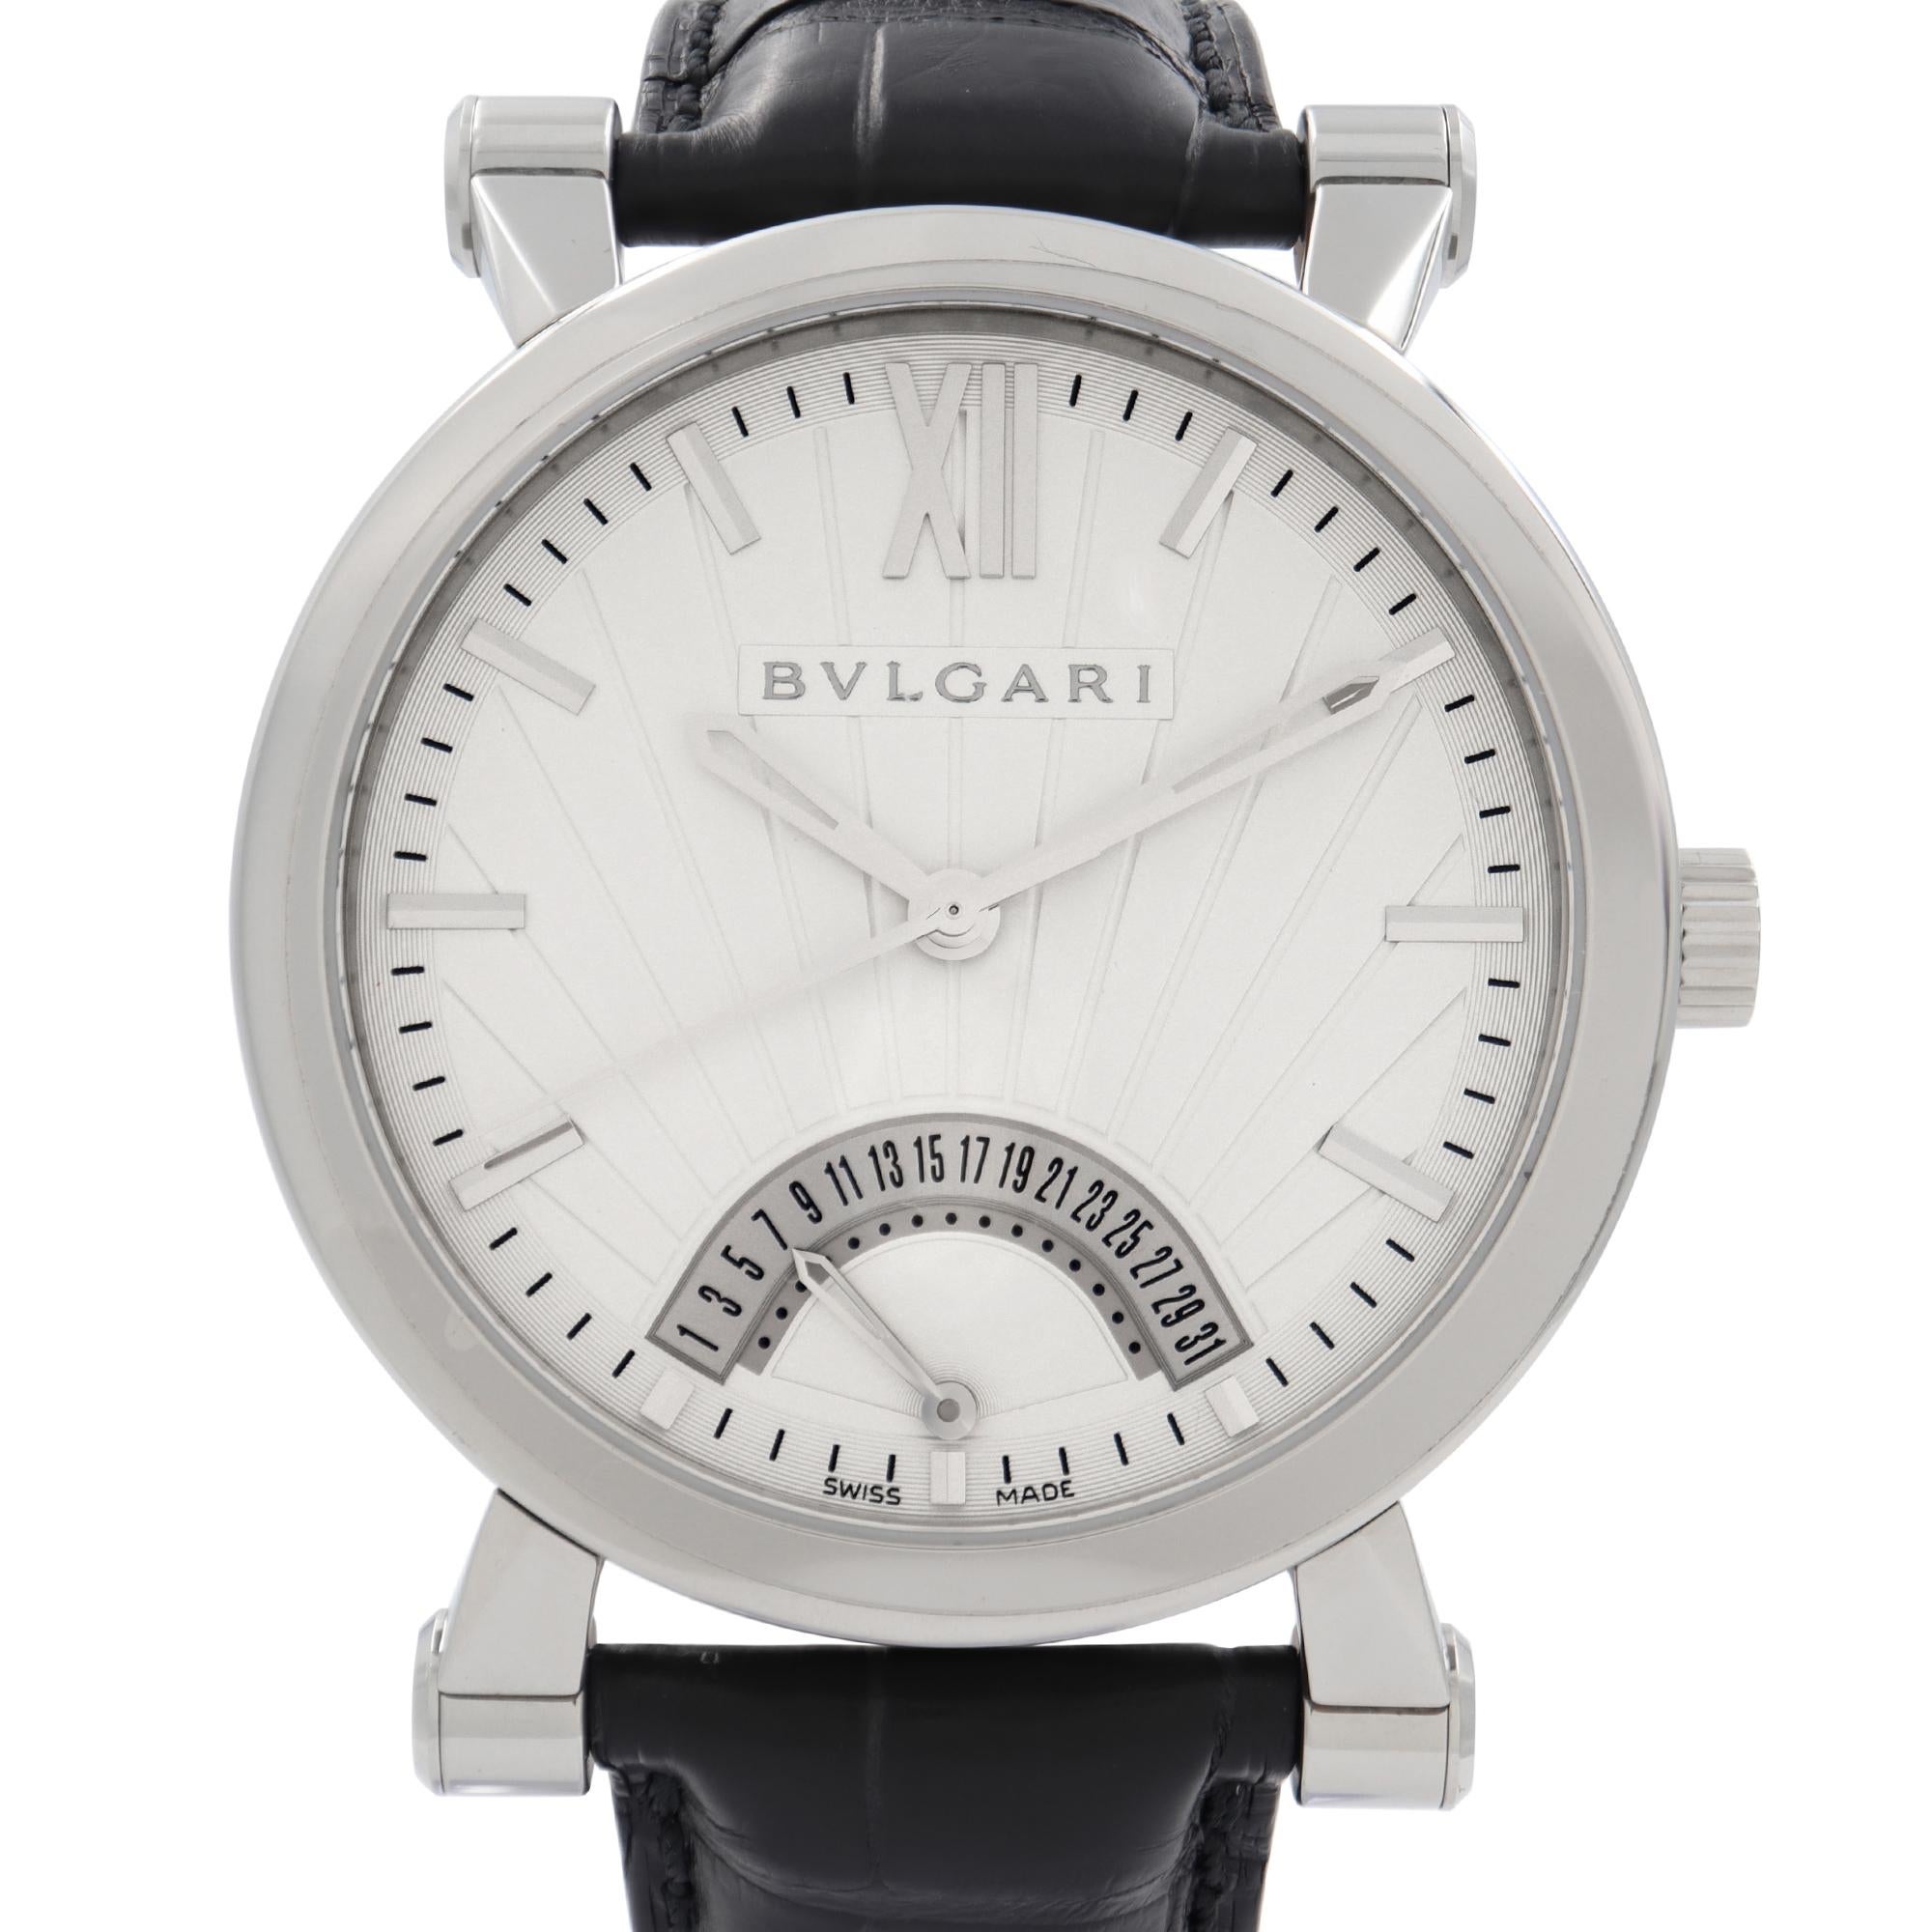 Display Model. Original Box and Papers are not included comes with a Chronostore presentation box and authenticity card. Covered by a one-year Chronostore warranty. 
Details:
Brand Bvlgari
Department Men
Model Number SB42SDR
Country/Region of